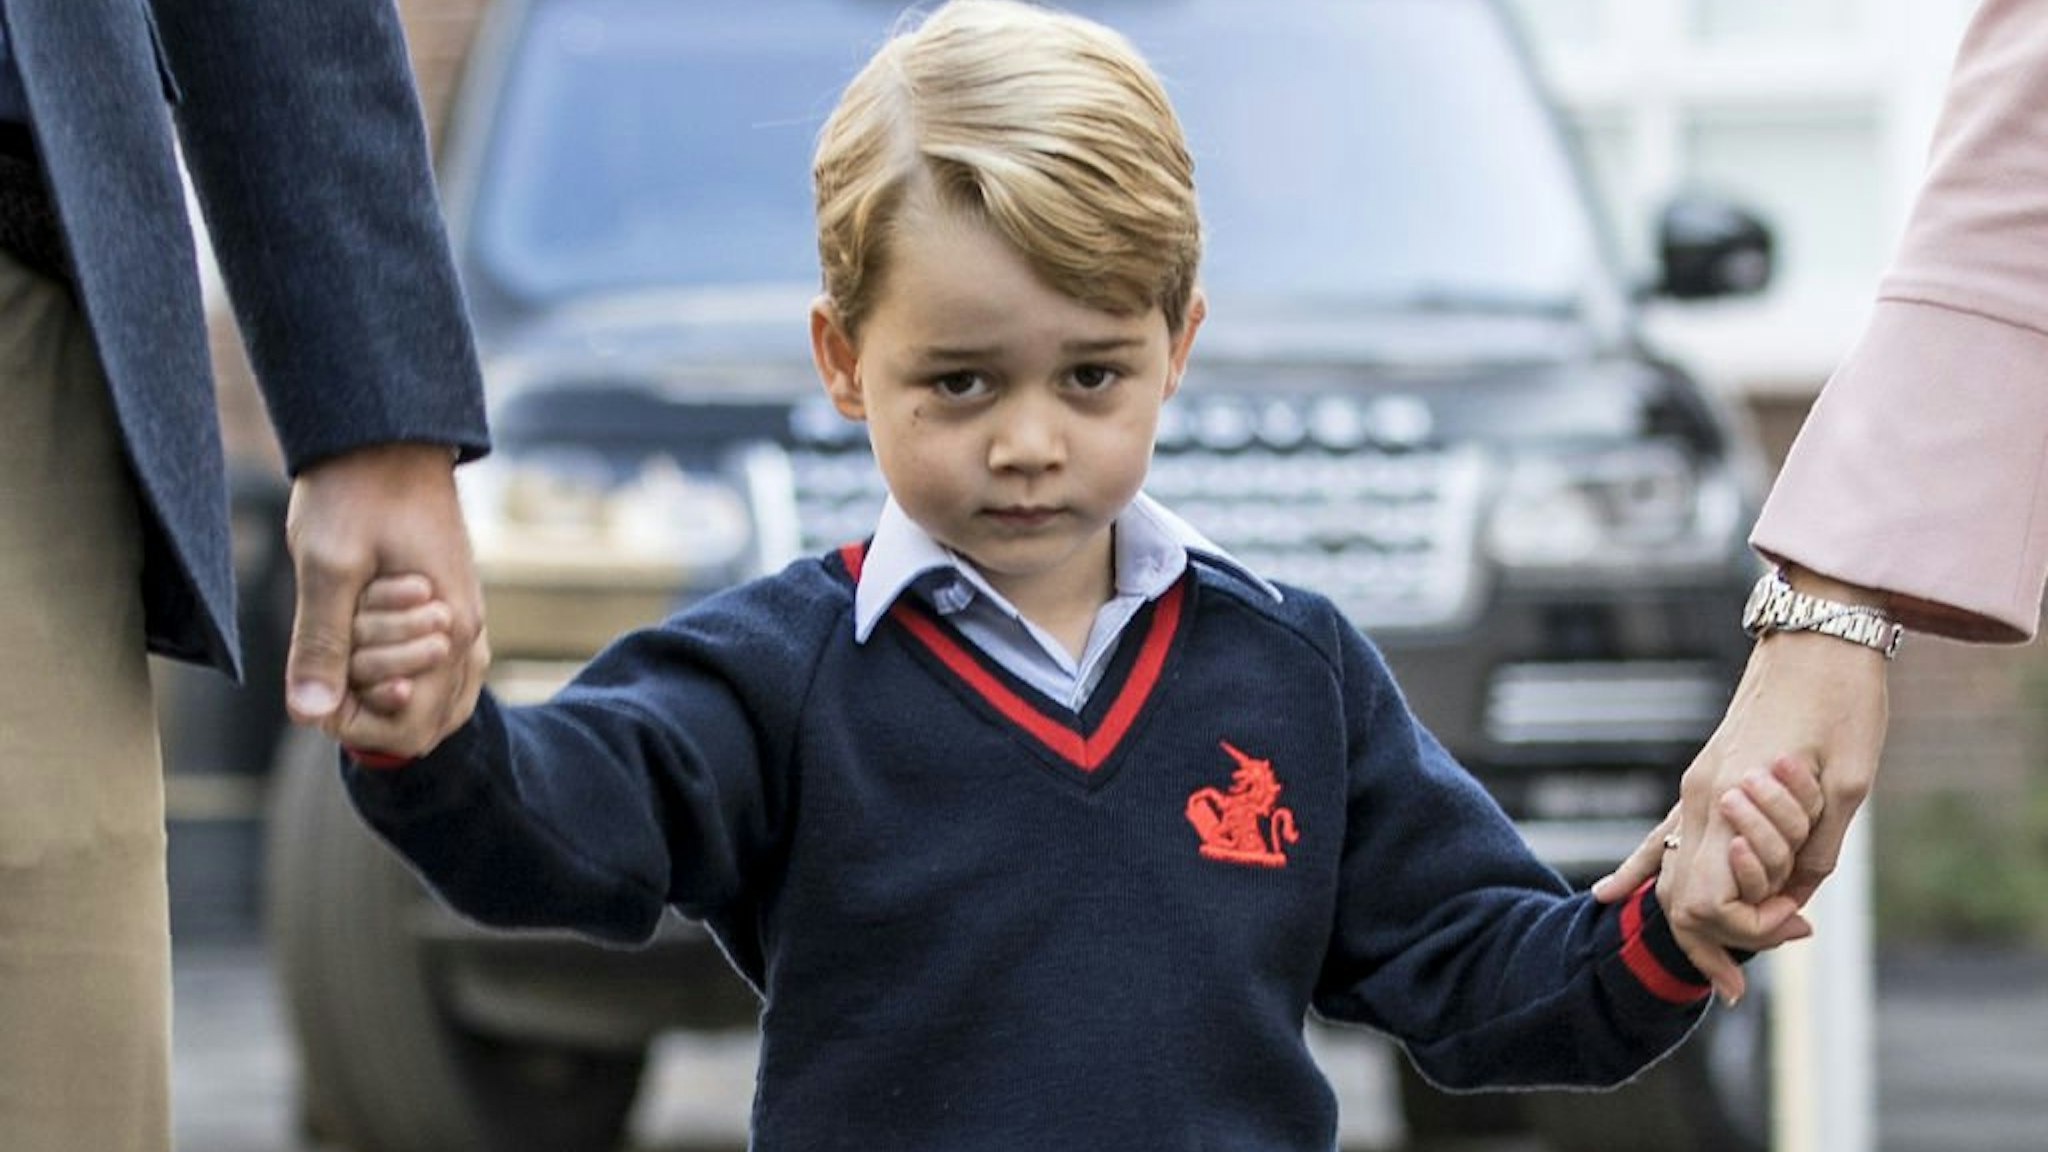 Britain's Prince George (C) accompanied by Britain's Prince William (L), Duke of Cambridge arrives for his first day of school at Thomas's school where he is met by Helen Haslem (R) head of the lower school in southwest London on September 7, 2017.